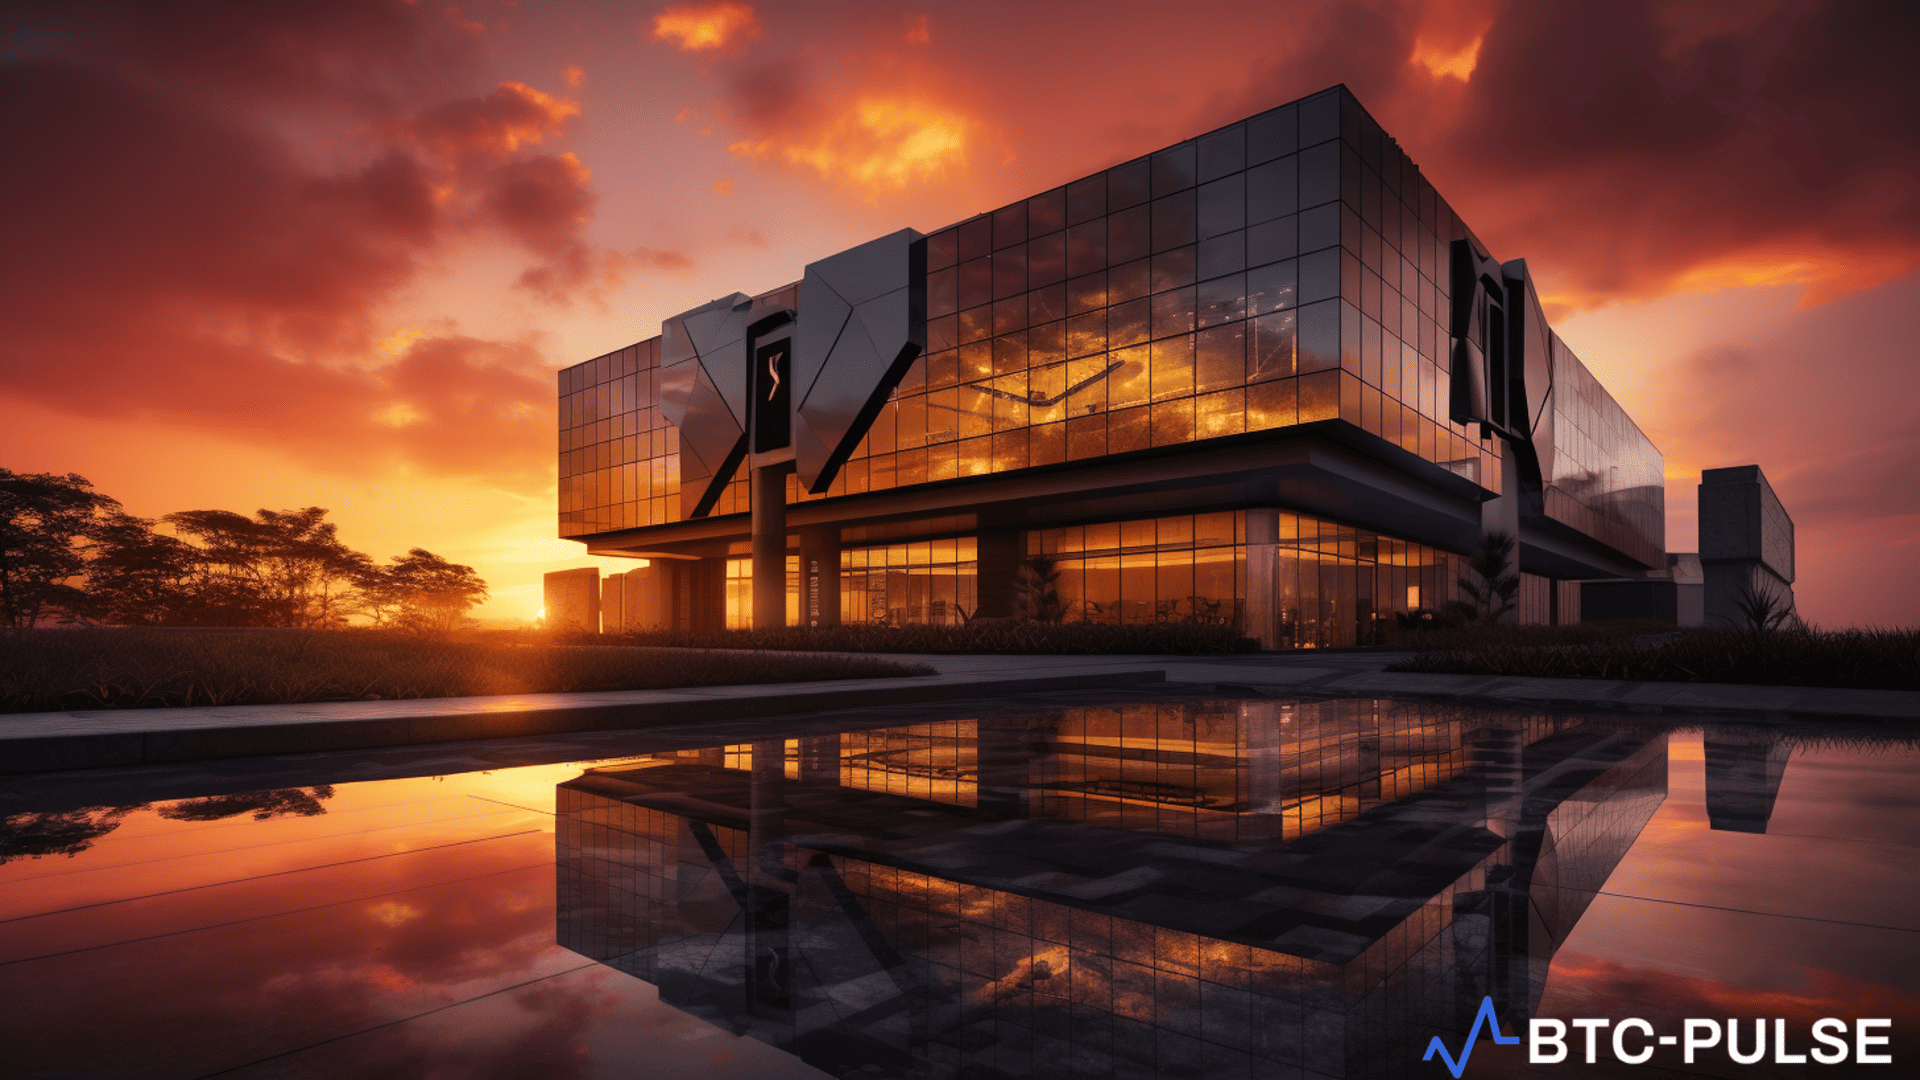 The Binance headquarters building Market captured during a dramatic sunset, symbolizing the crypto giant's enduring presence amidst controversies.